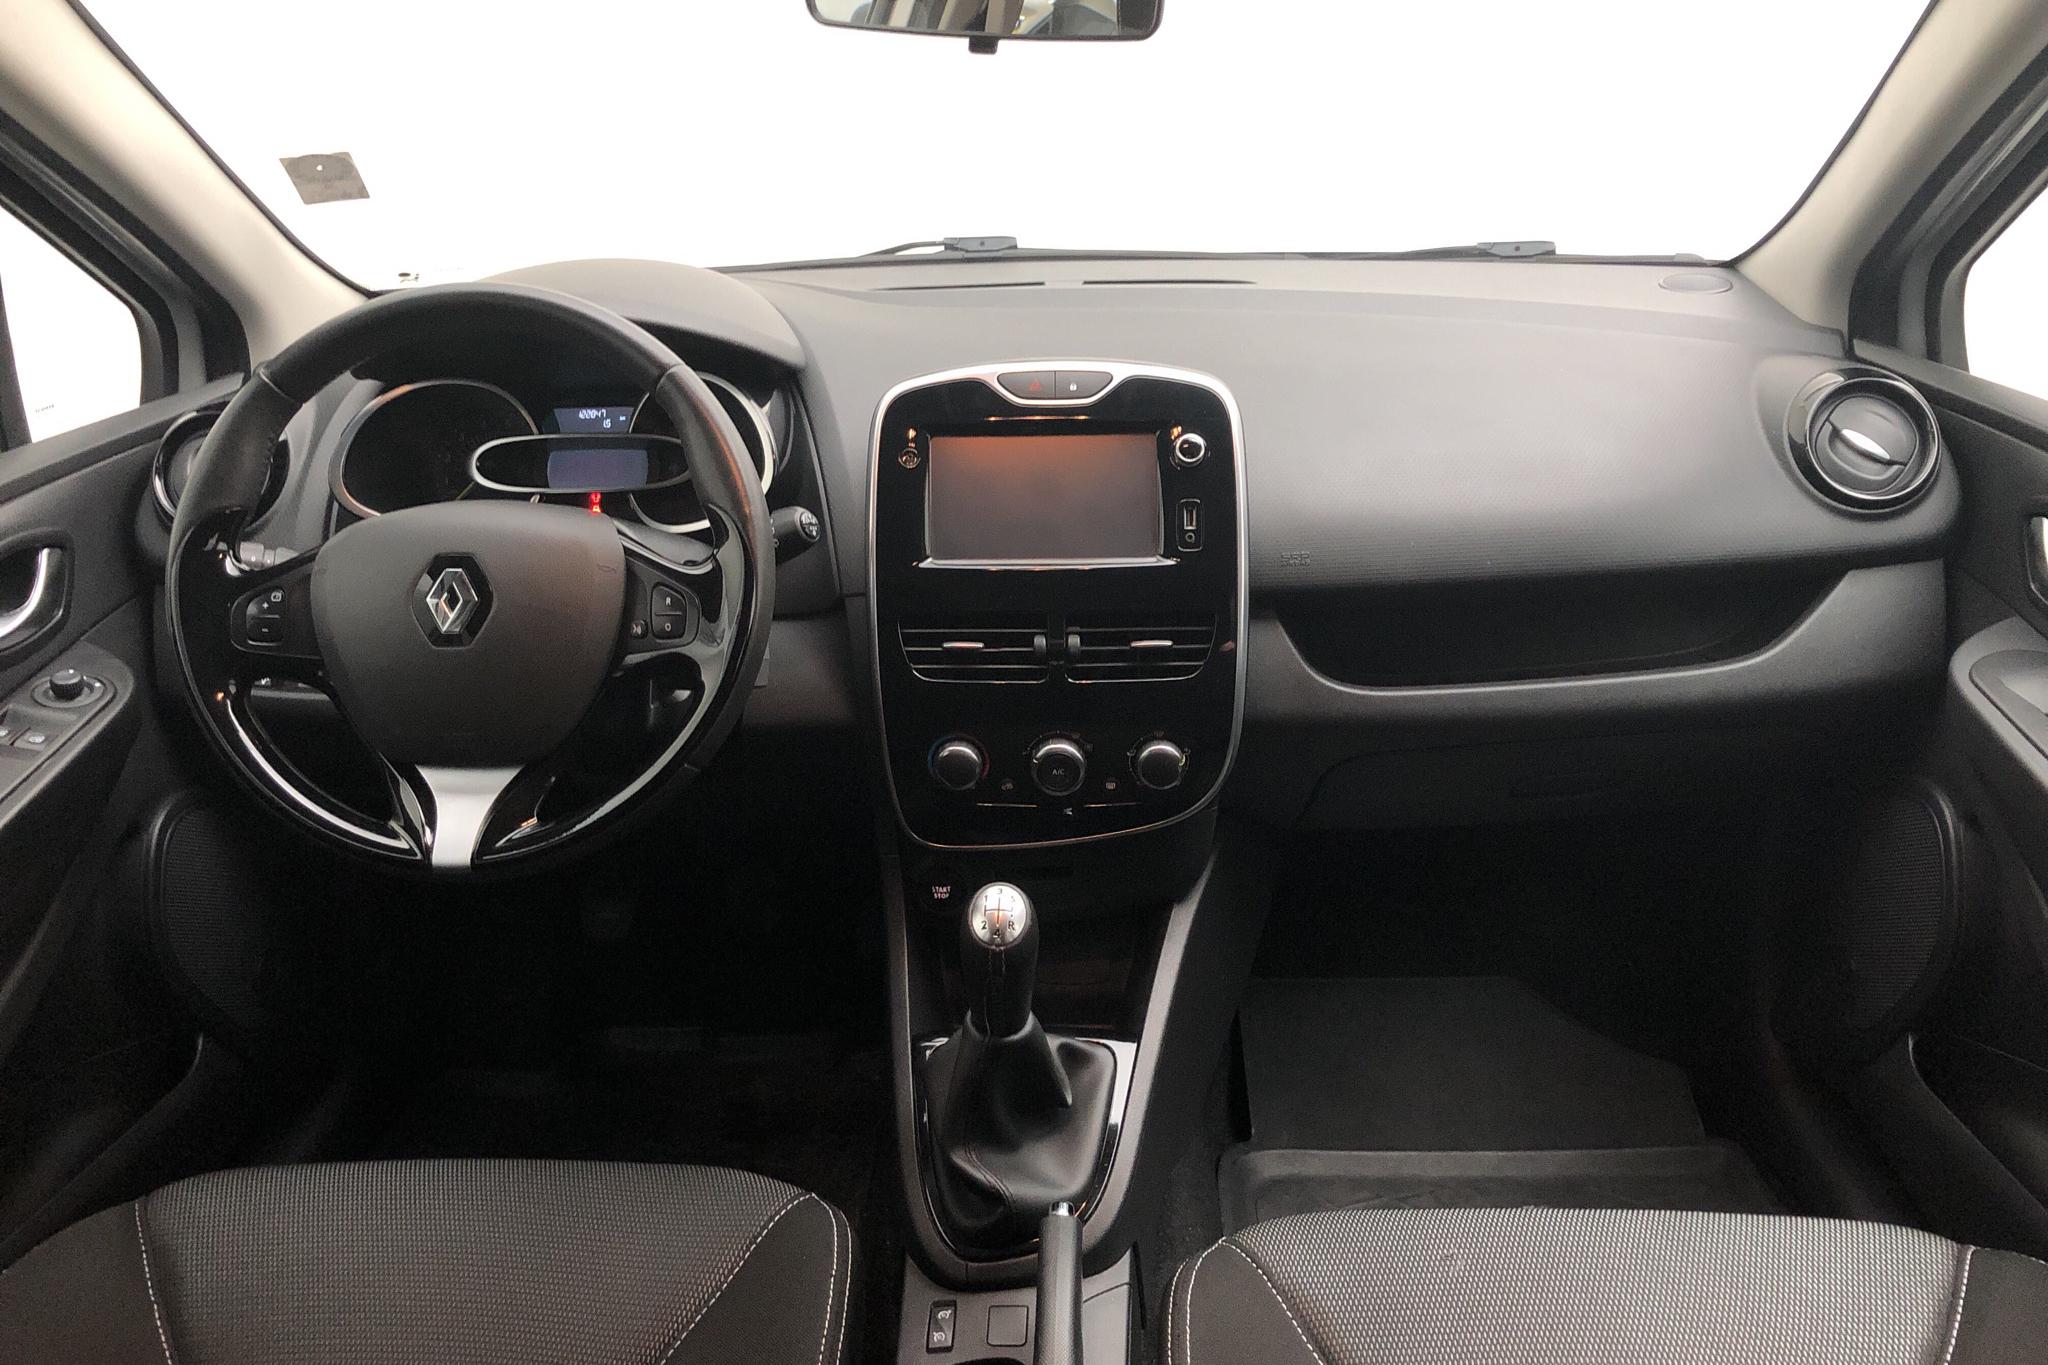 Renault Clio IV 1.5 dCi 5dr (90hk) - 12 285 mil - Manuell - silver - 2016